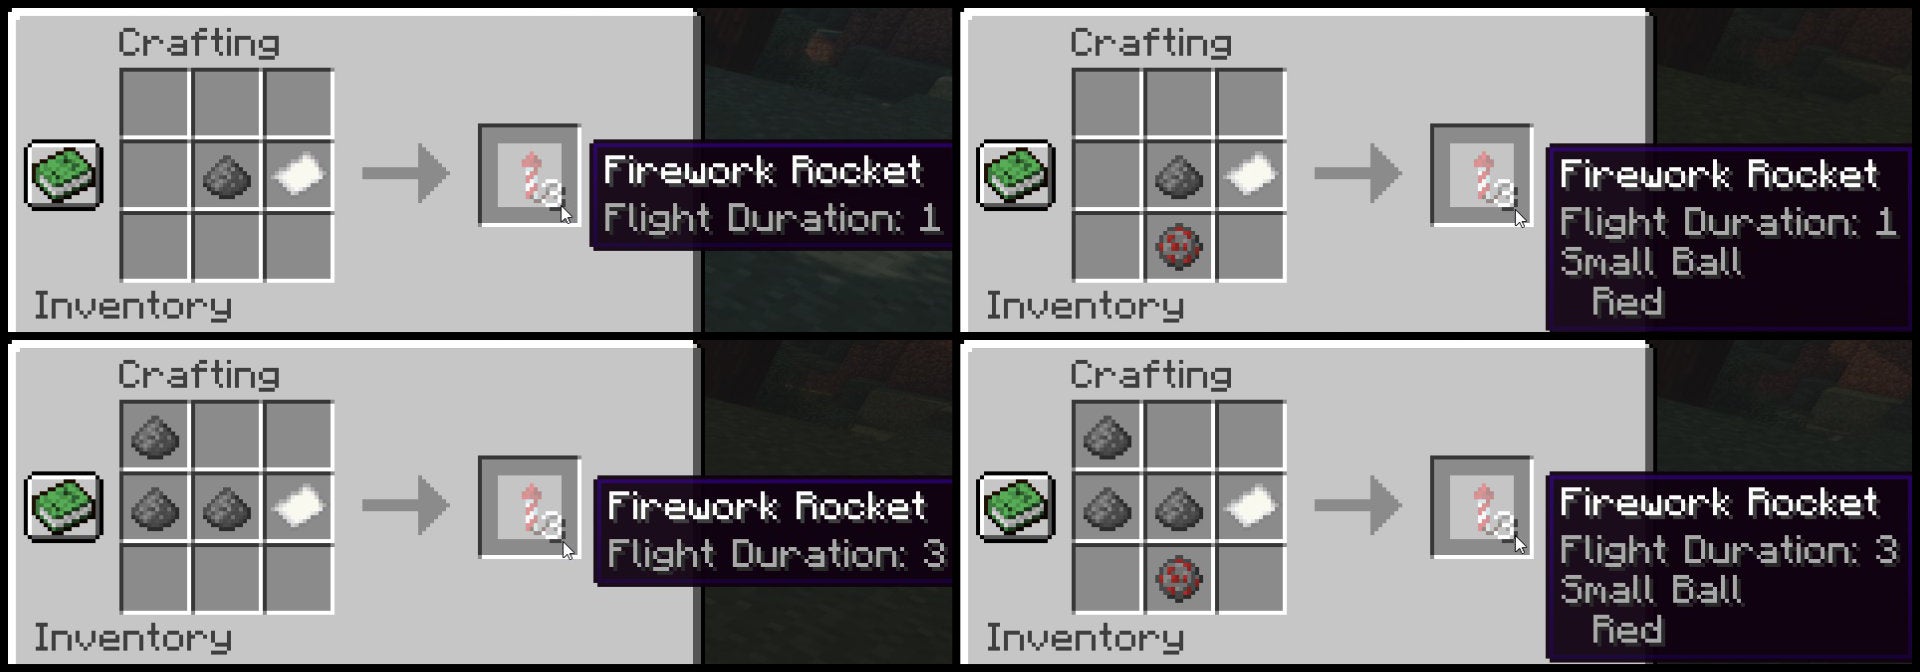 A composite image of four types of Firework Rocket being created in four different crafting windows in Minecraft.